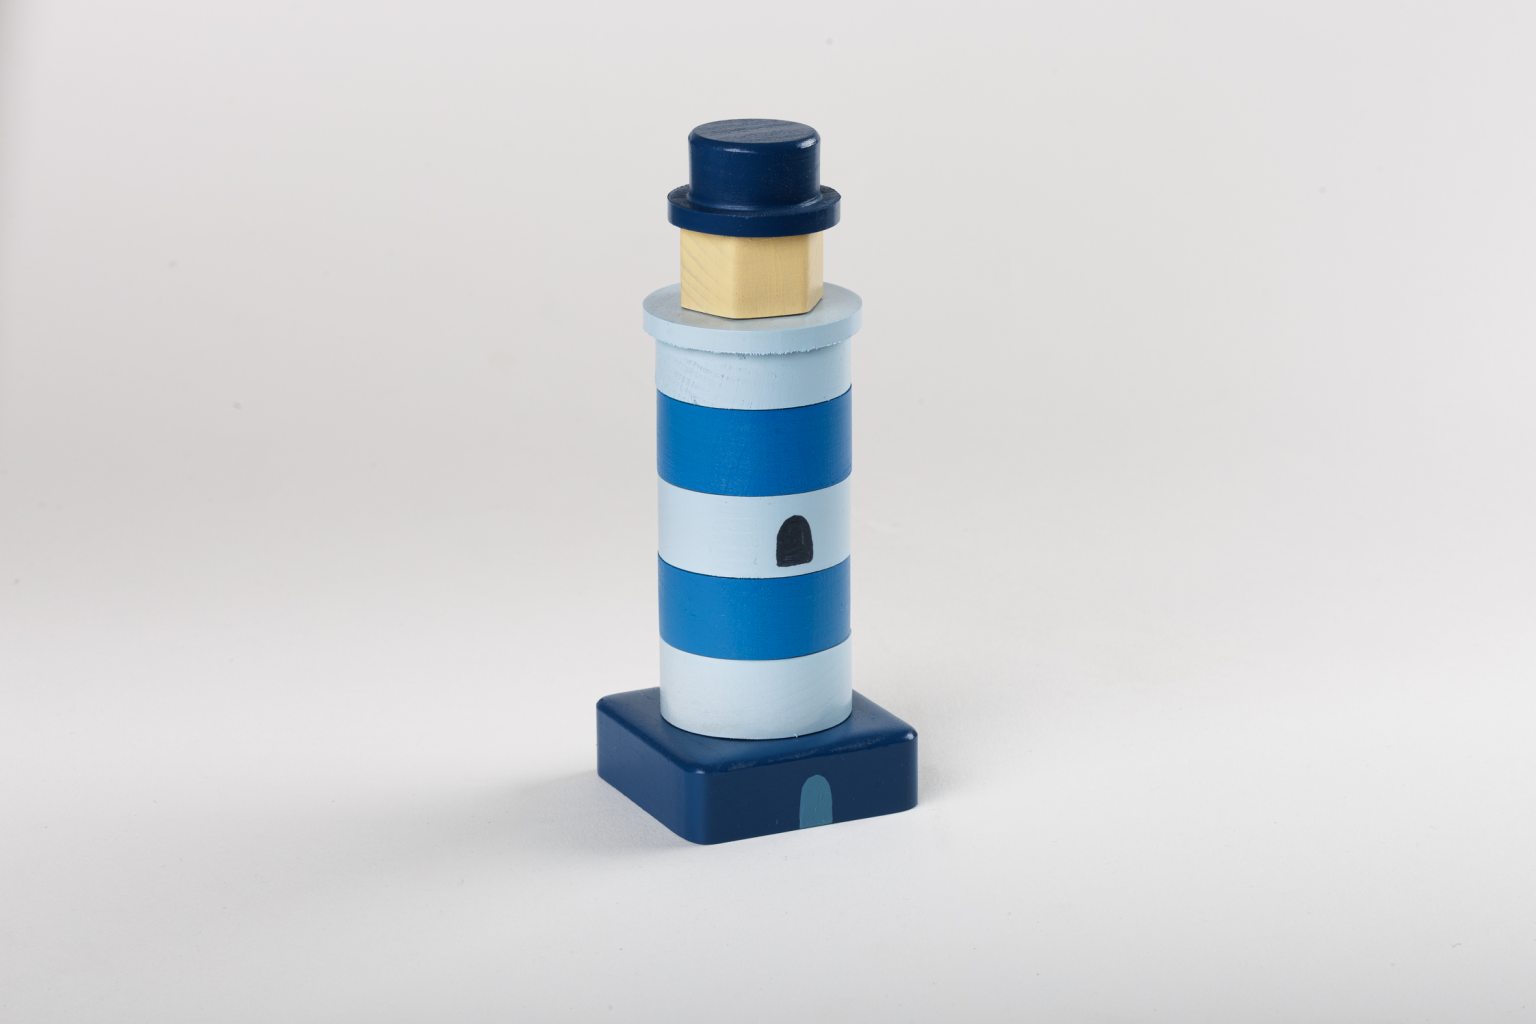 Wooden stacking game "Lighthouse"